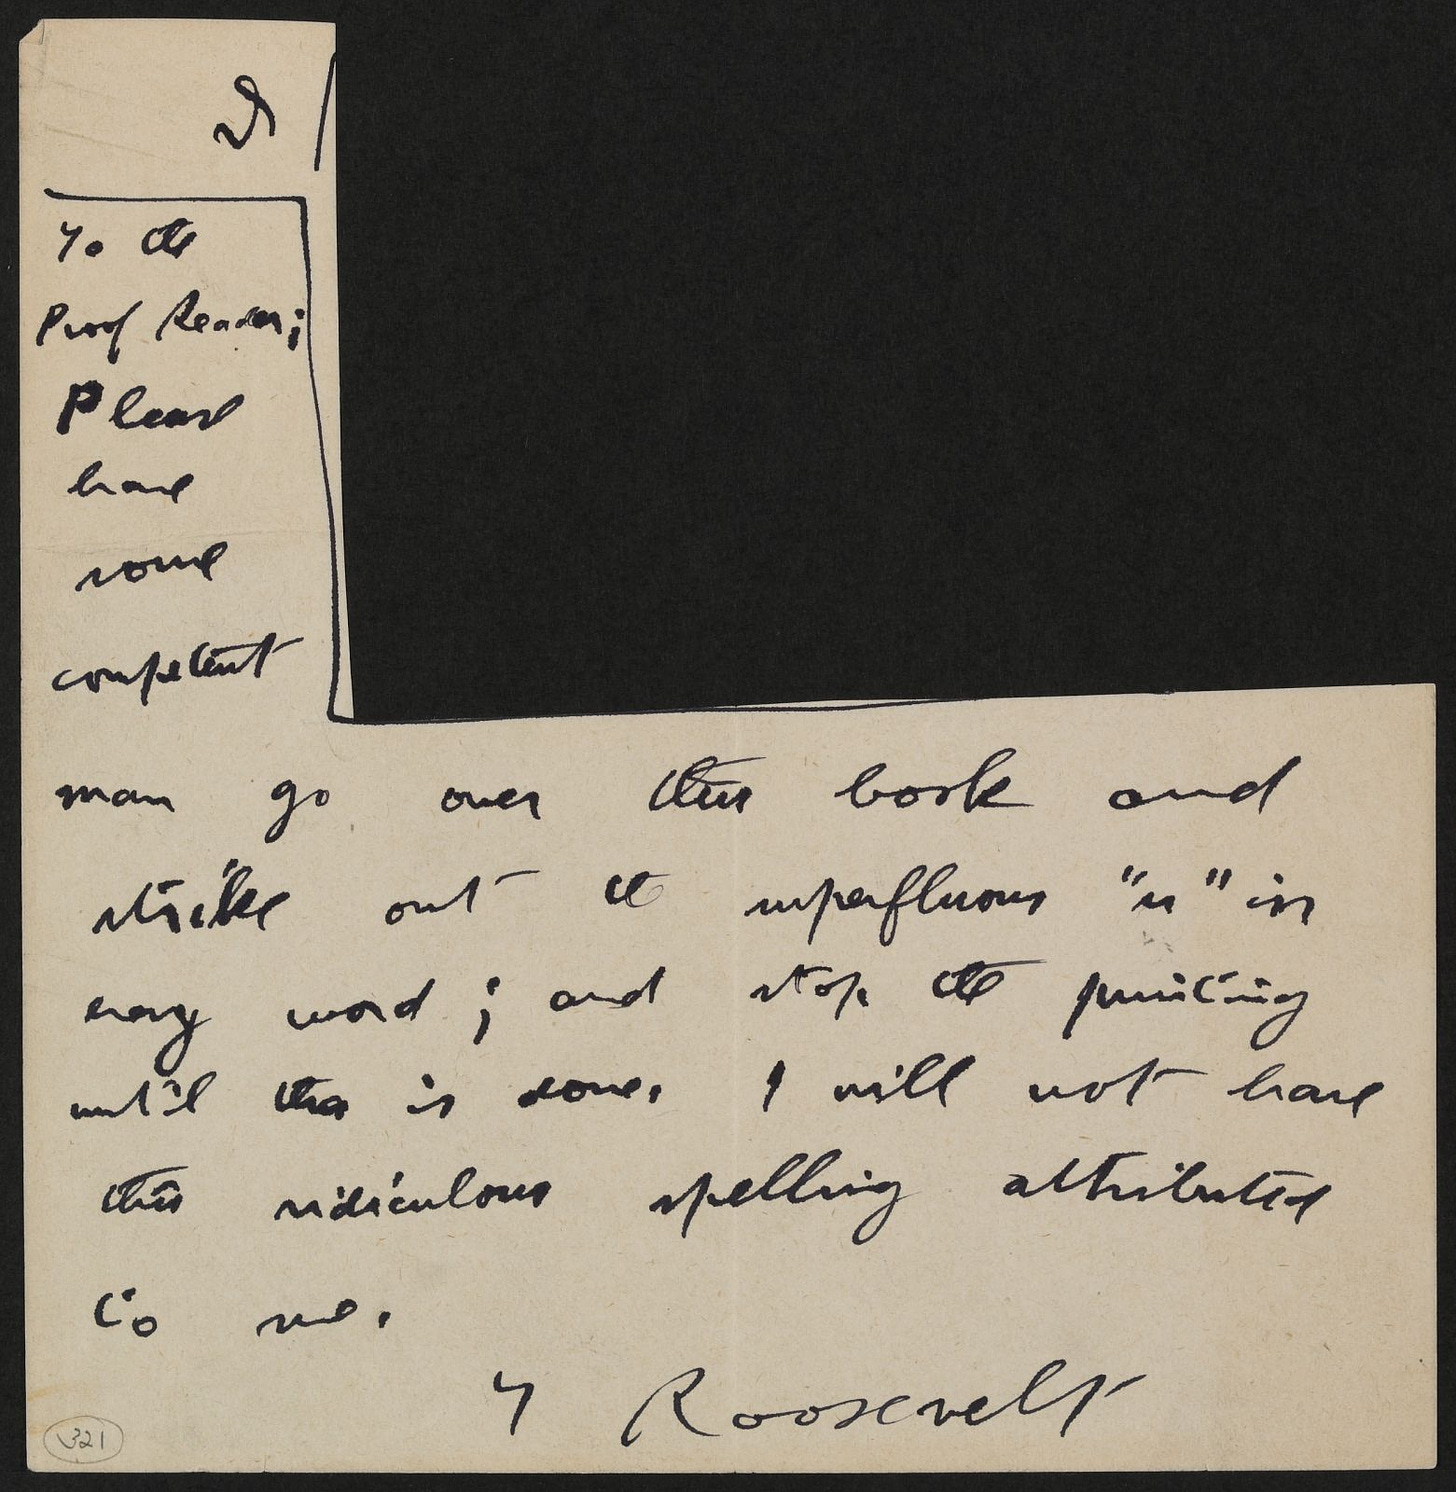 Memorandum from Theodore Roosevelt to the proofreader of Fear God and Take Your Own Part